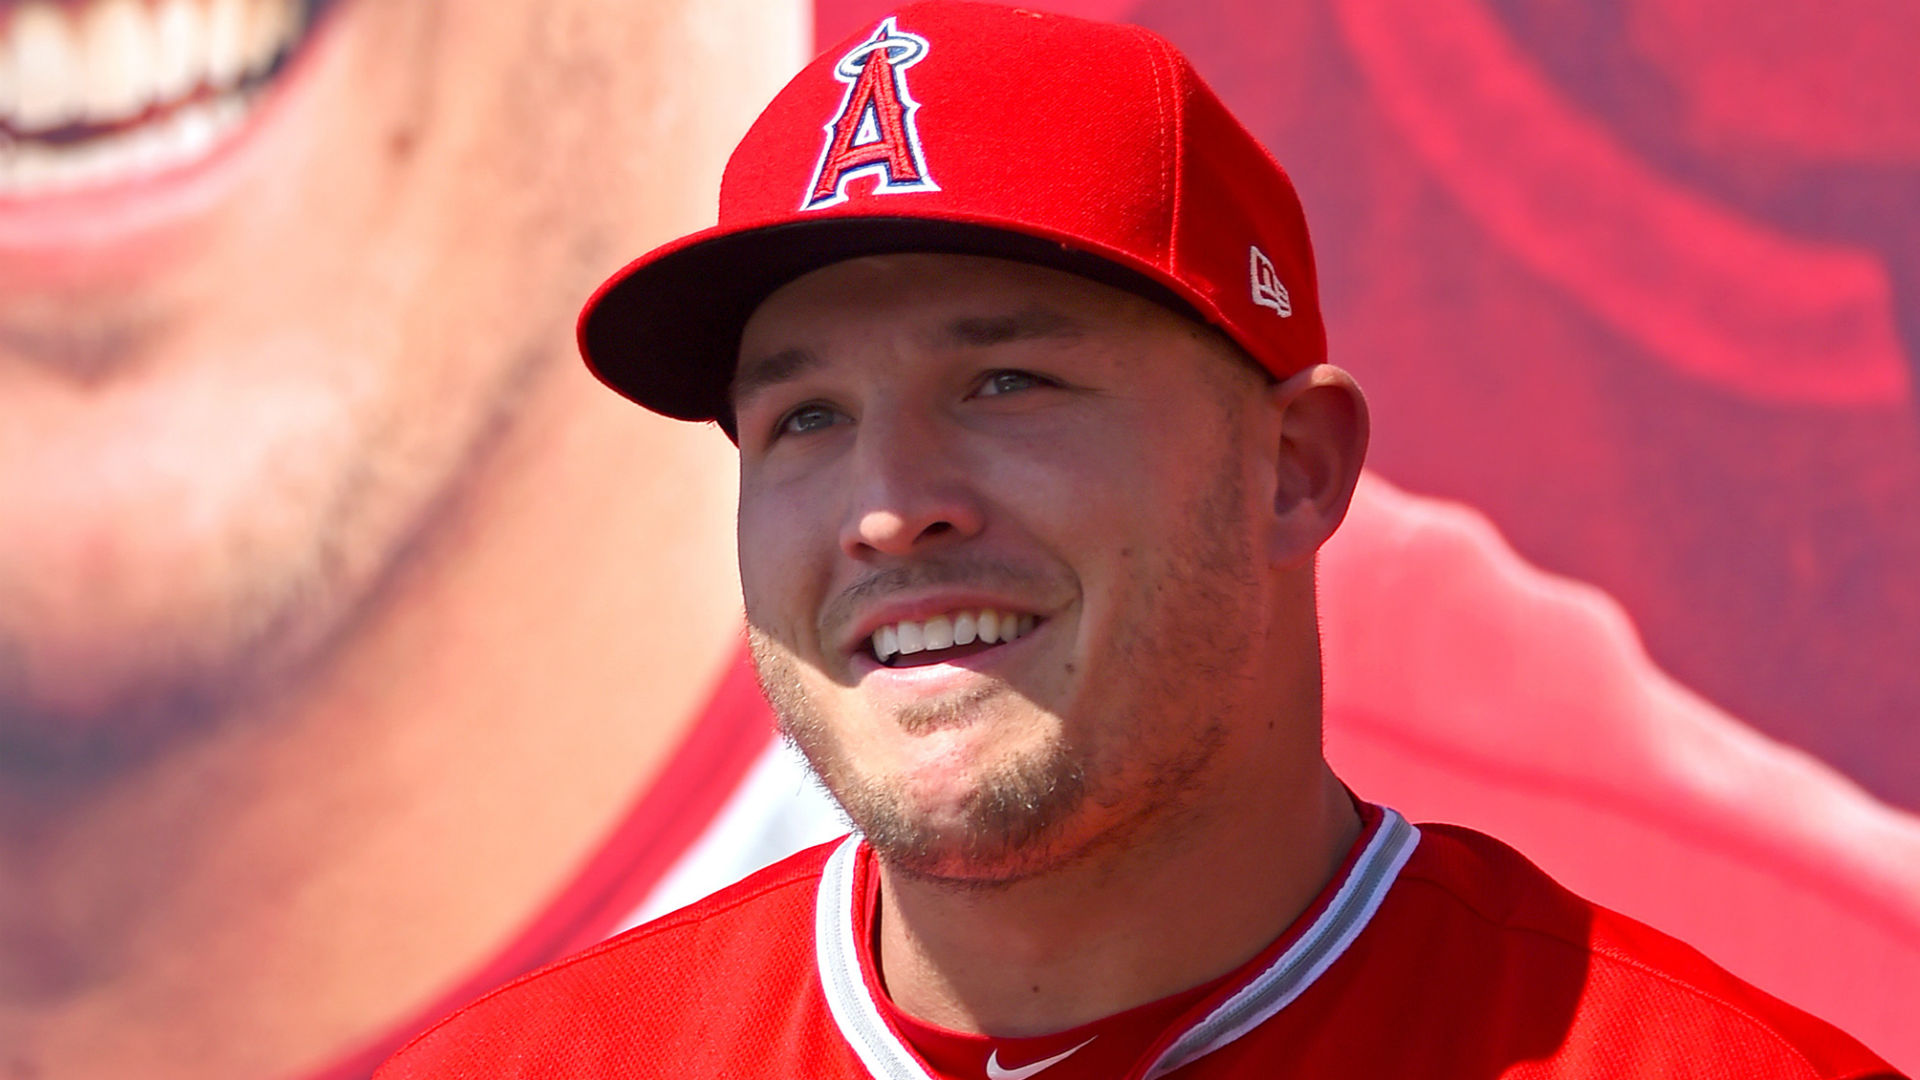 "I want to bring a championship back to Anaheim. Let's go, baby!" Trout said.